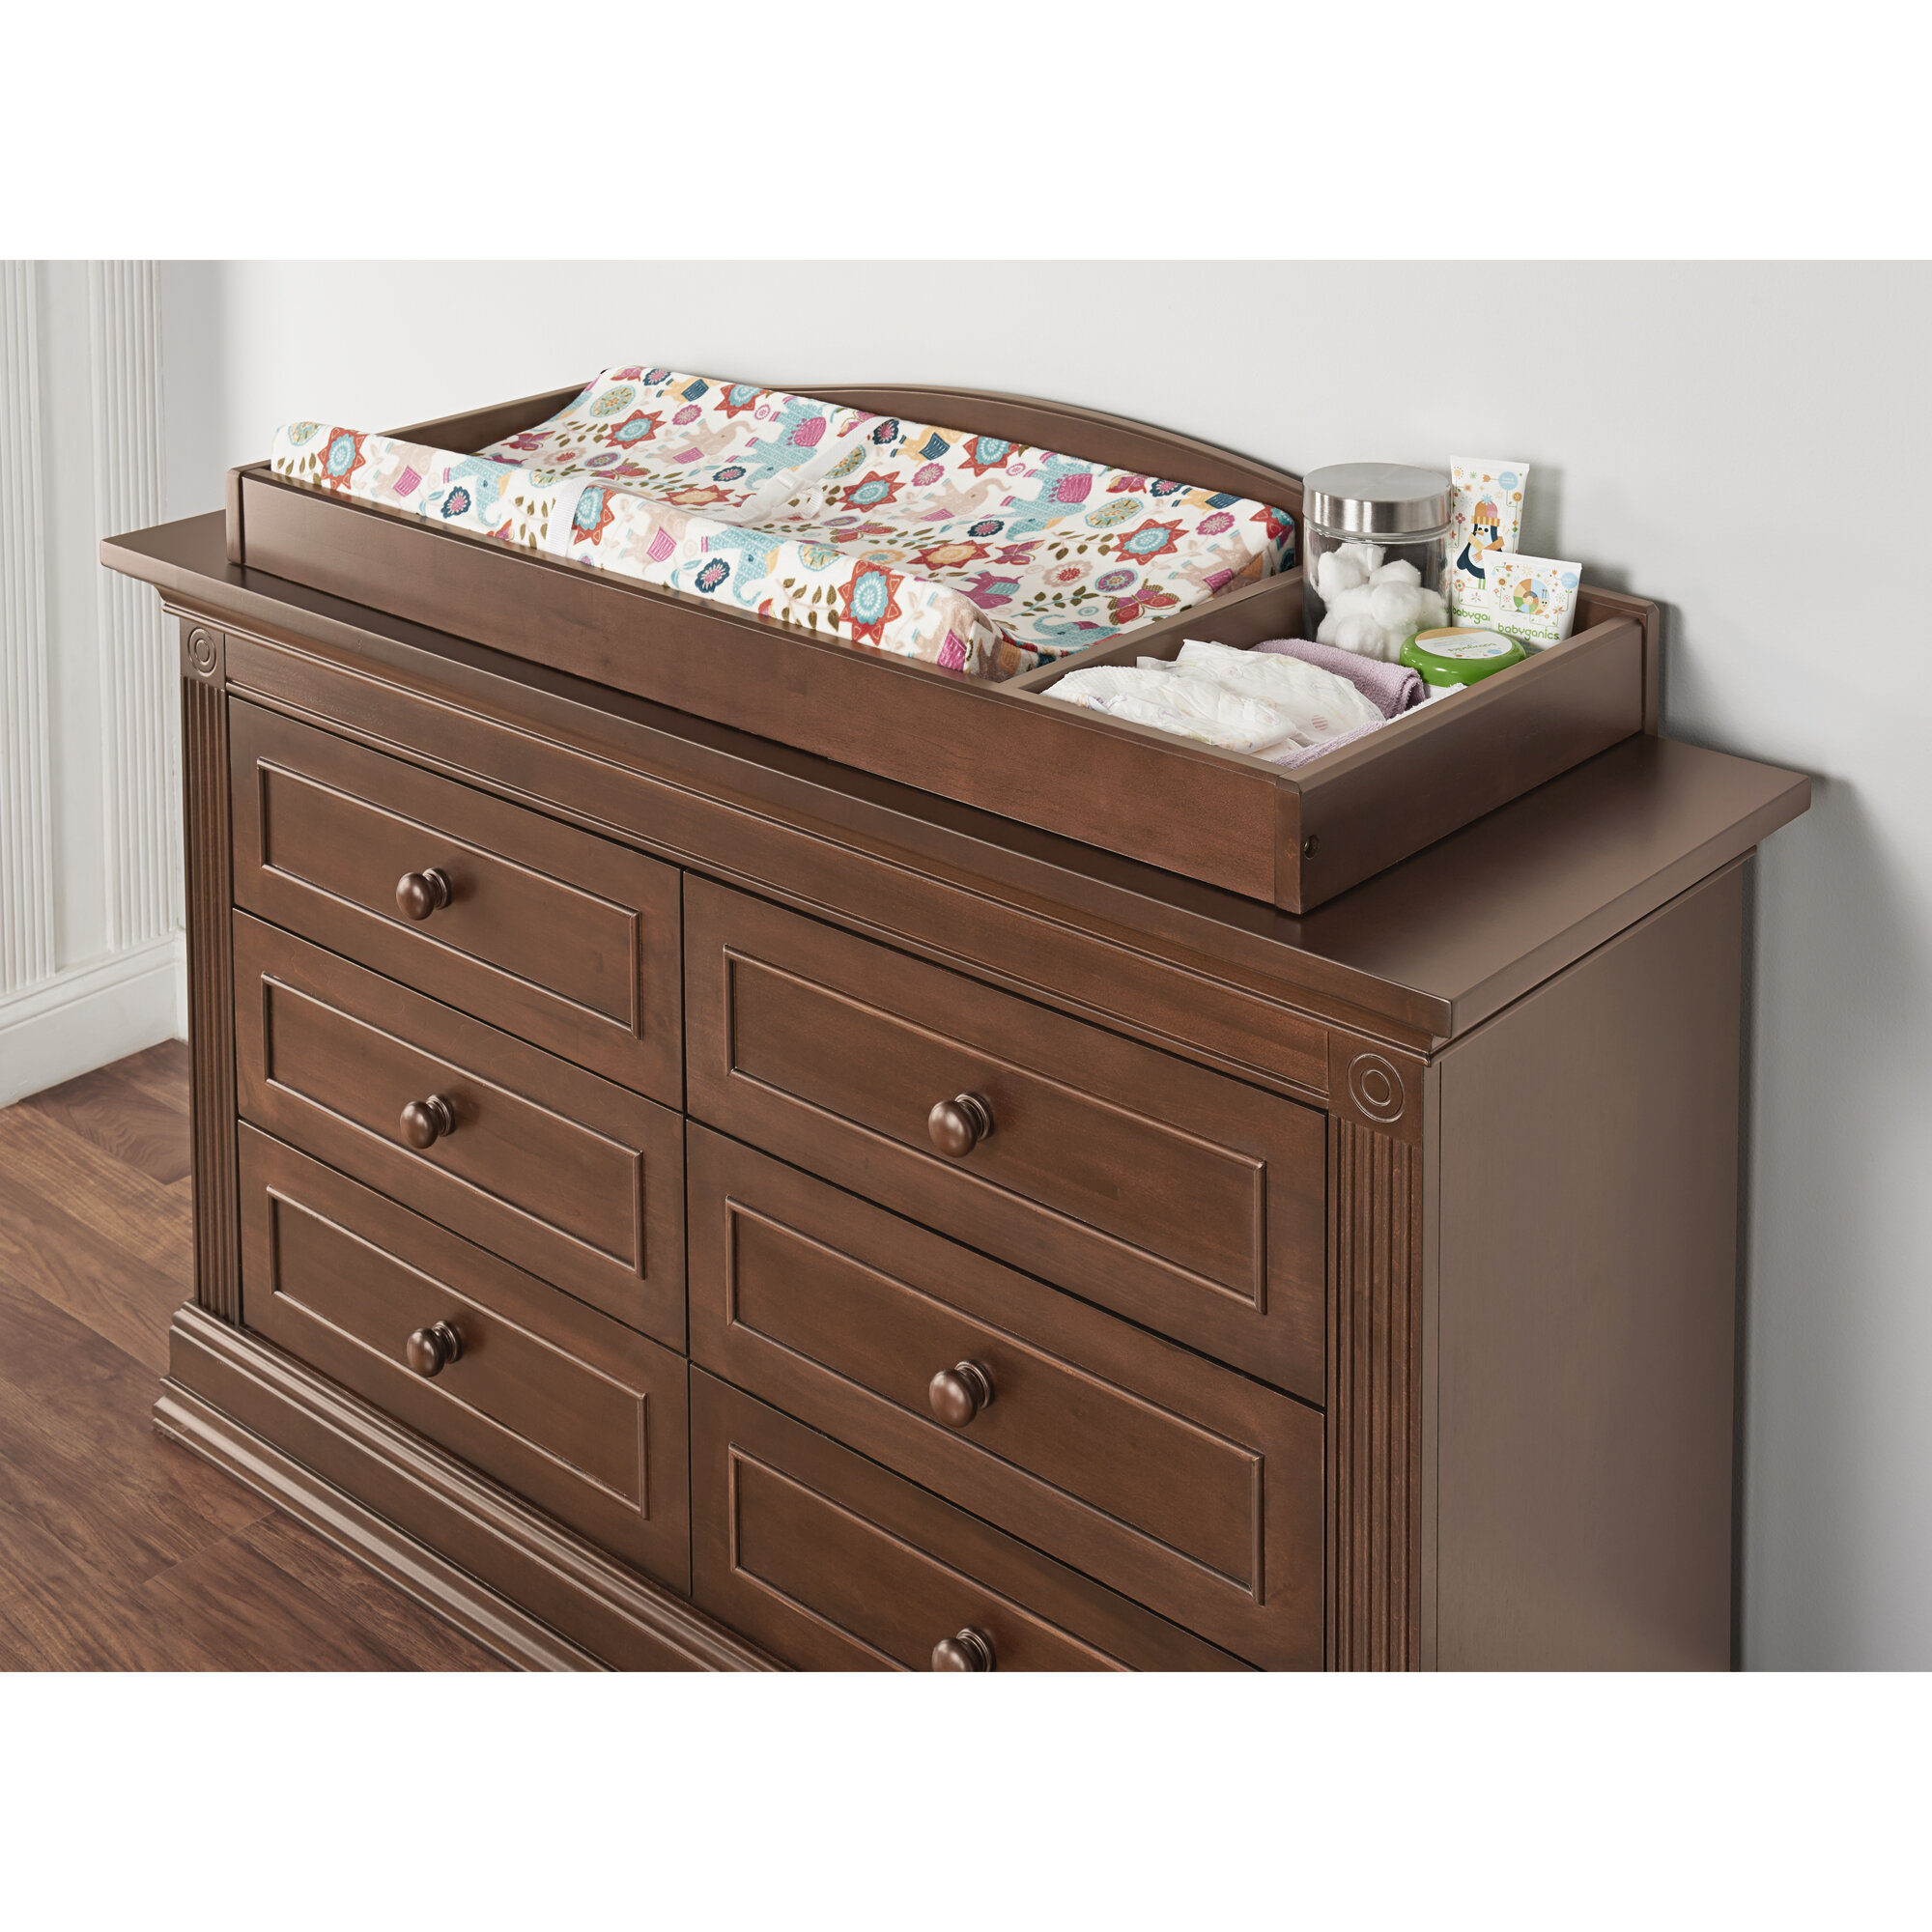 Changing Table Topper For Dresser Outlet, 54% OFF | www.ingeniovirtual.com